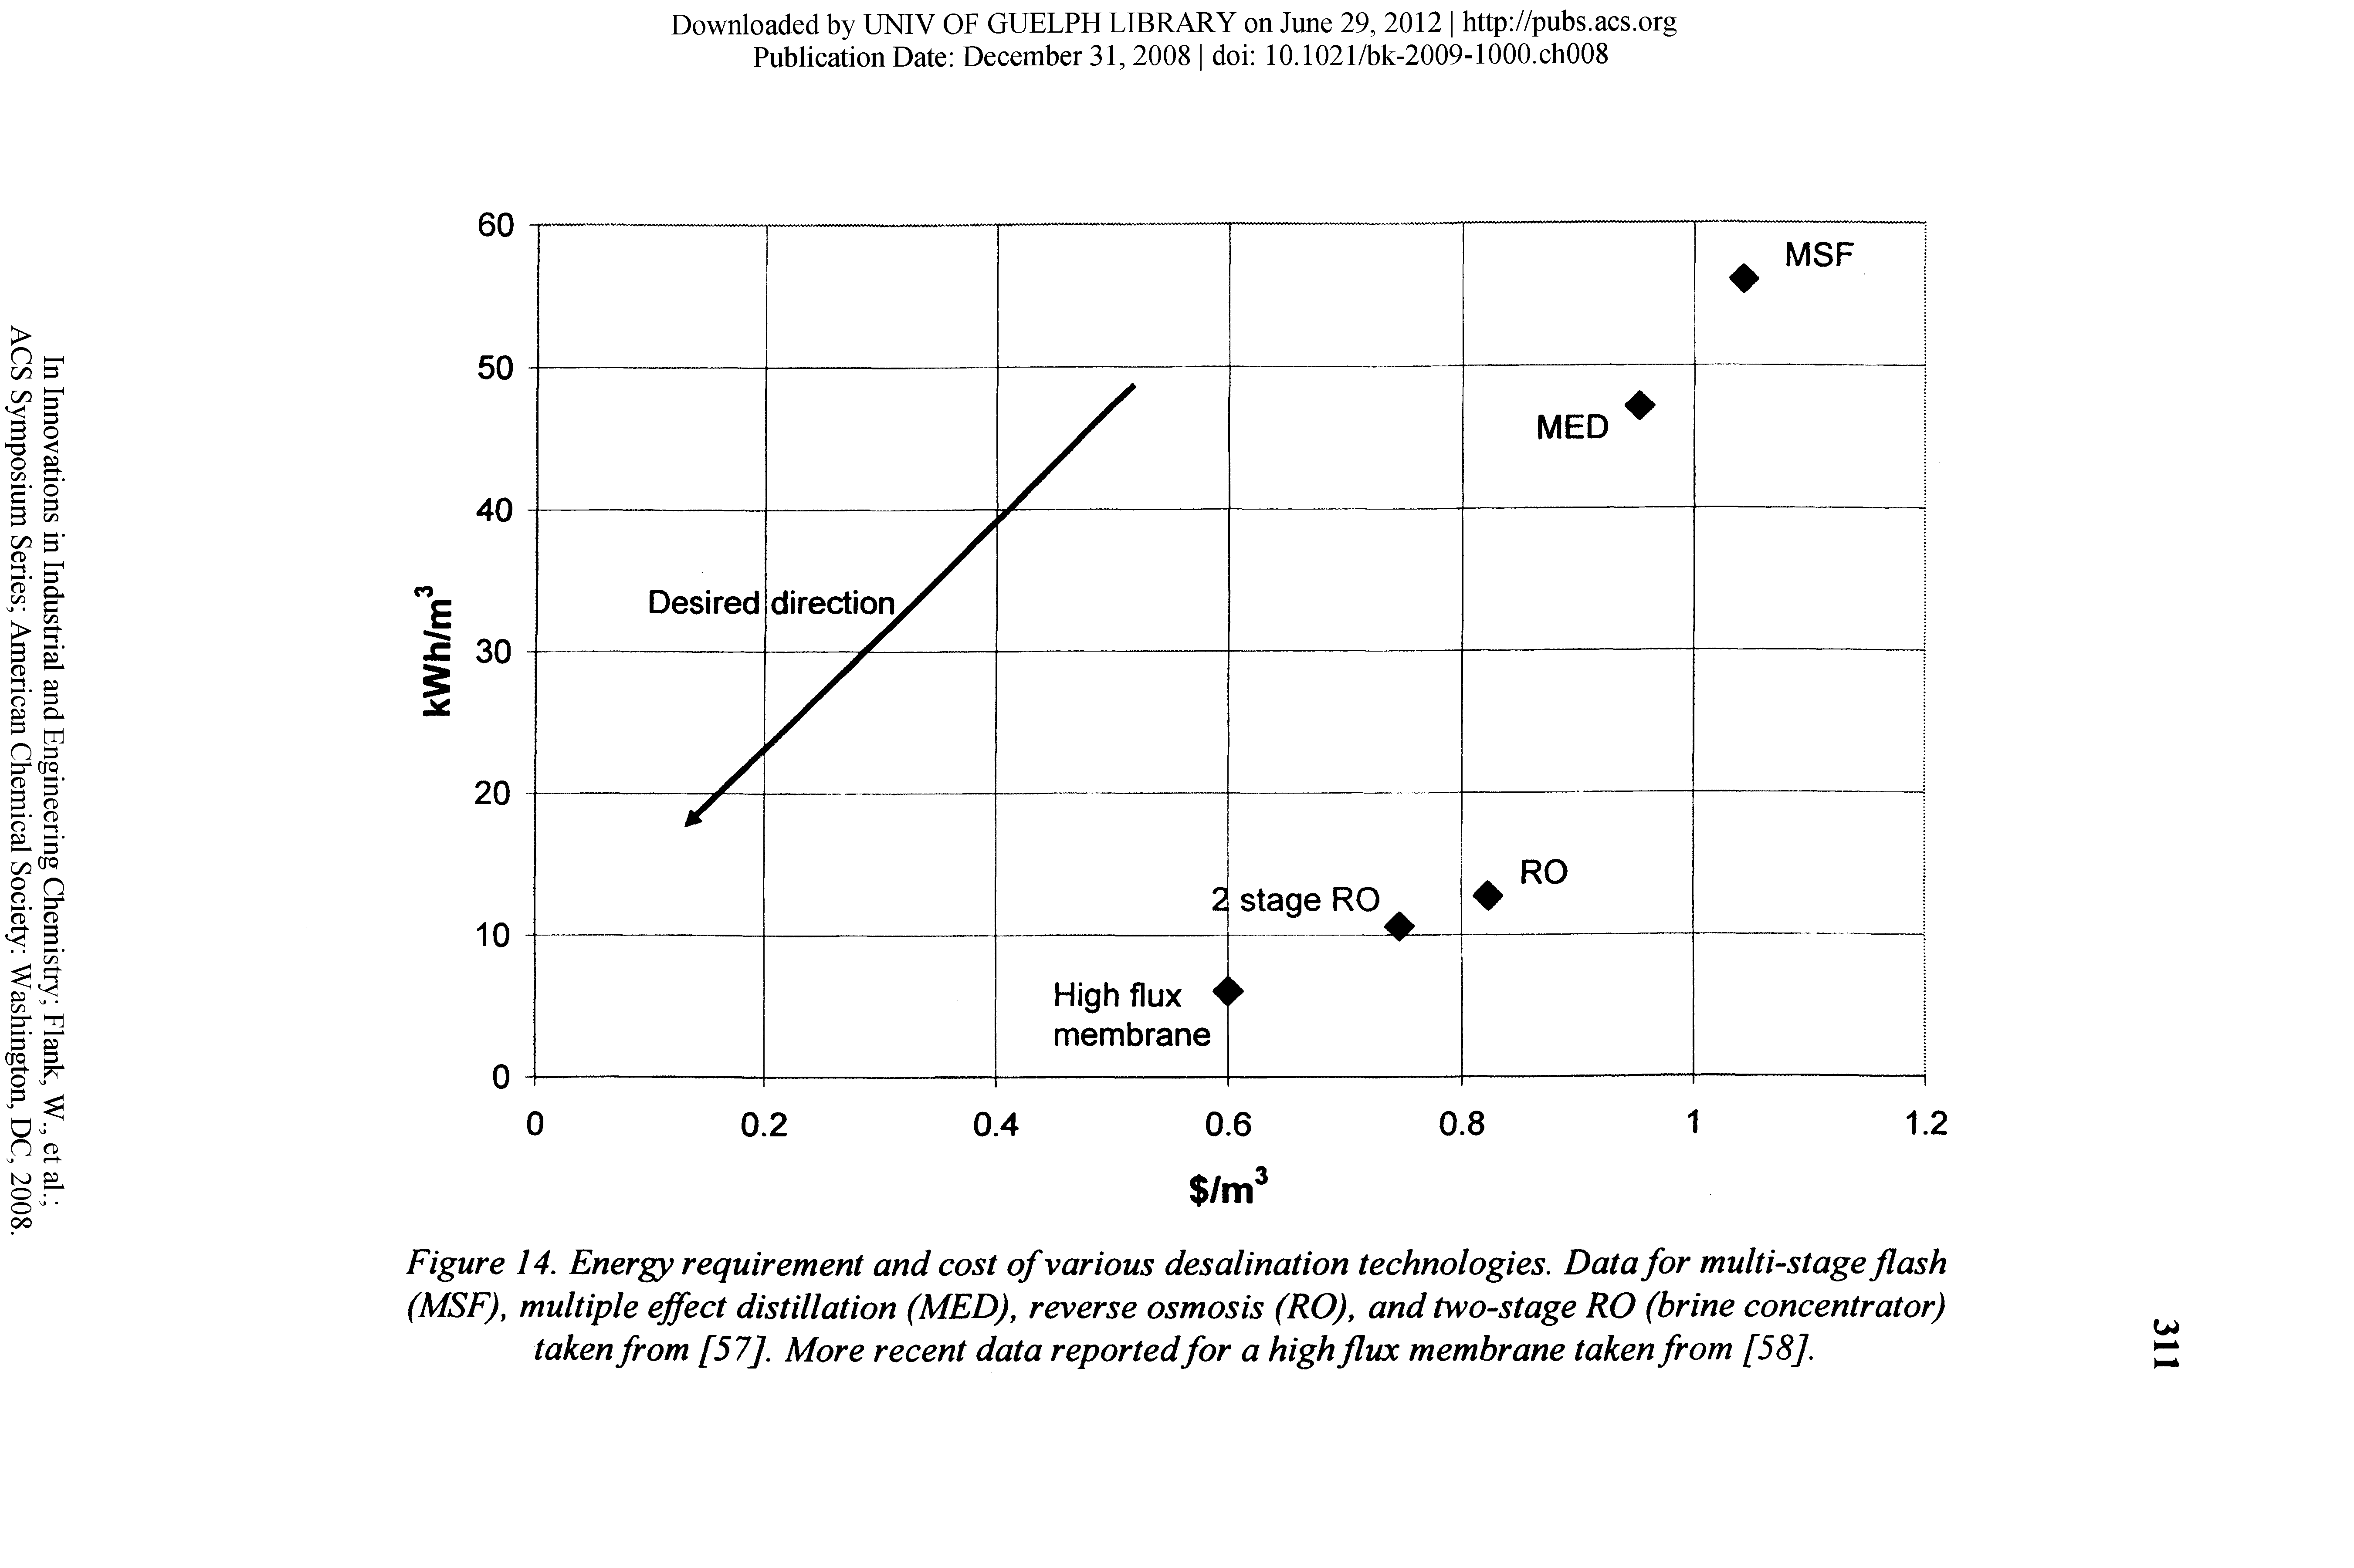 Figure 14. Energy requirement and cost of various desalination technologies. Data for multi-stage flash (MSF), multiple effect distillation (MED), reverse osmosis (RO), and two-stage RO (brine concentrator) taken from [57]. More recent data reportedfor a high flux membrane taken from [58].